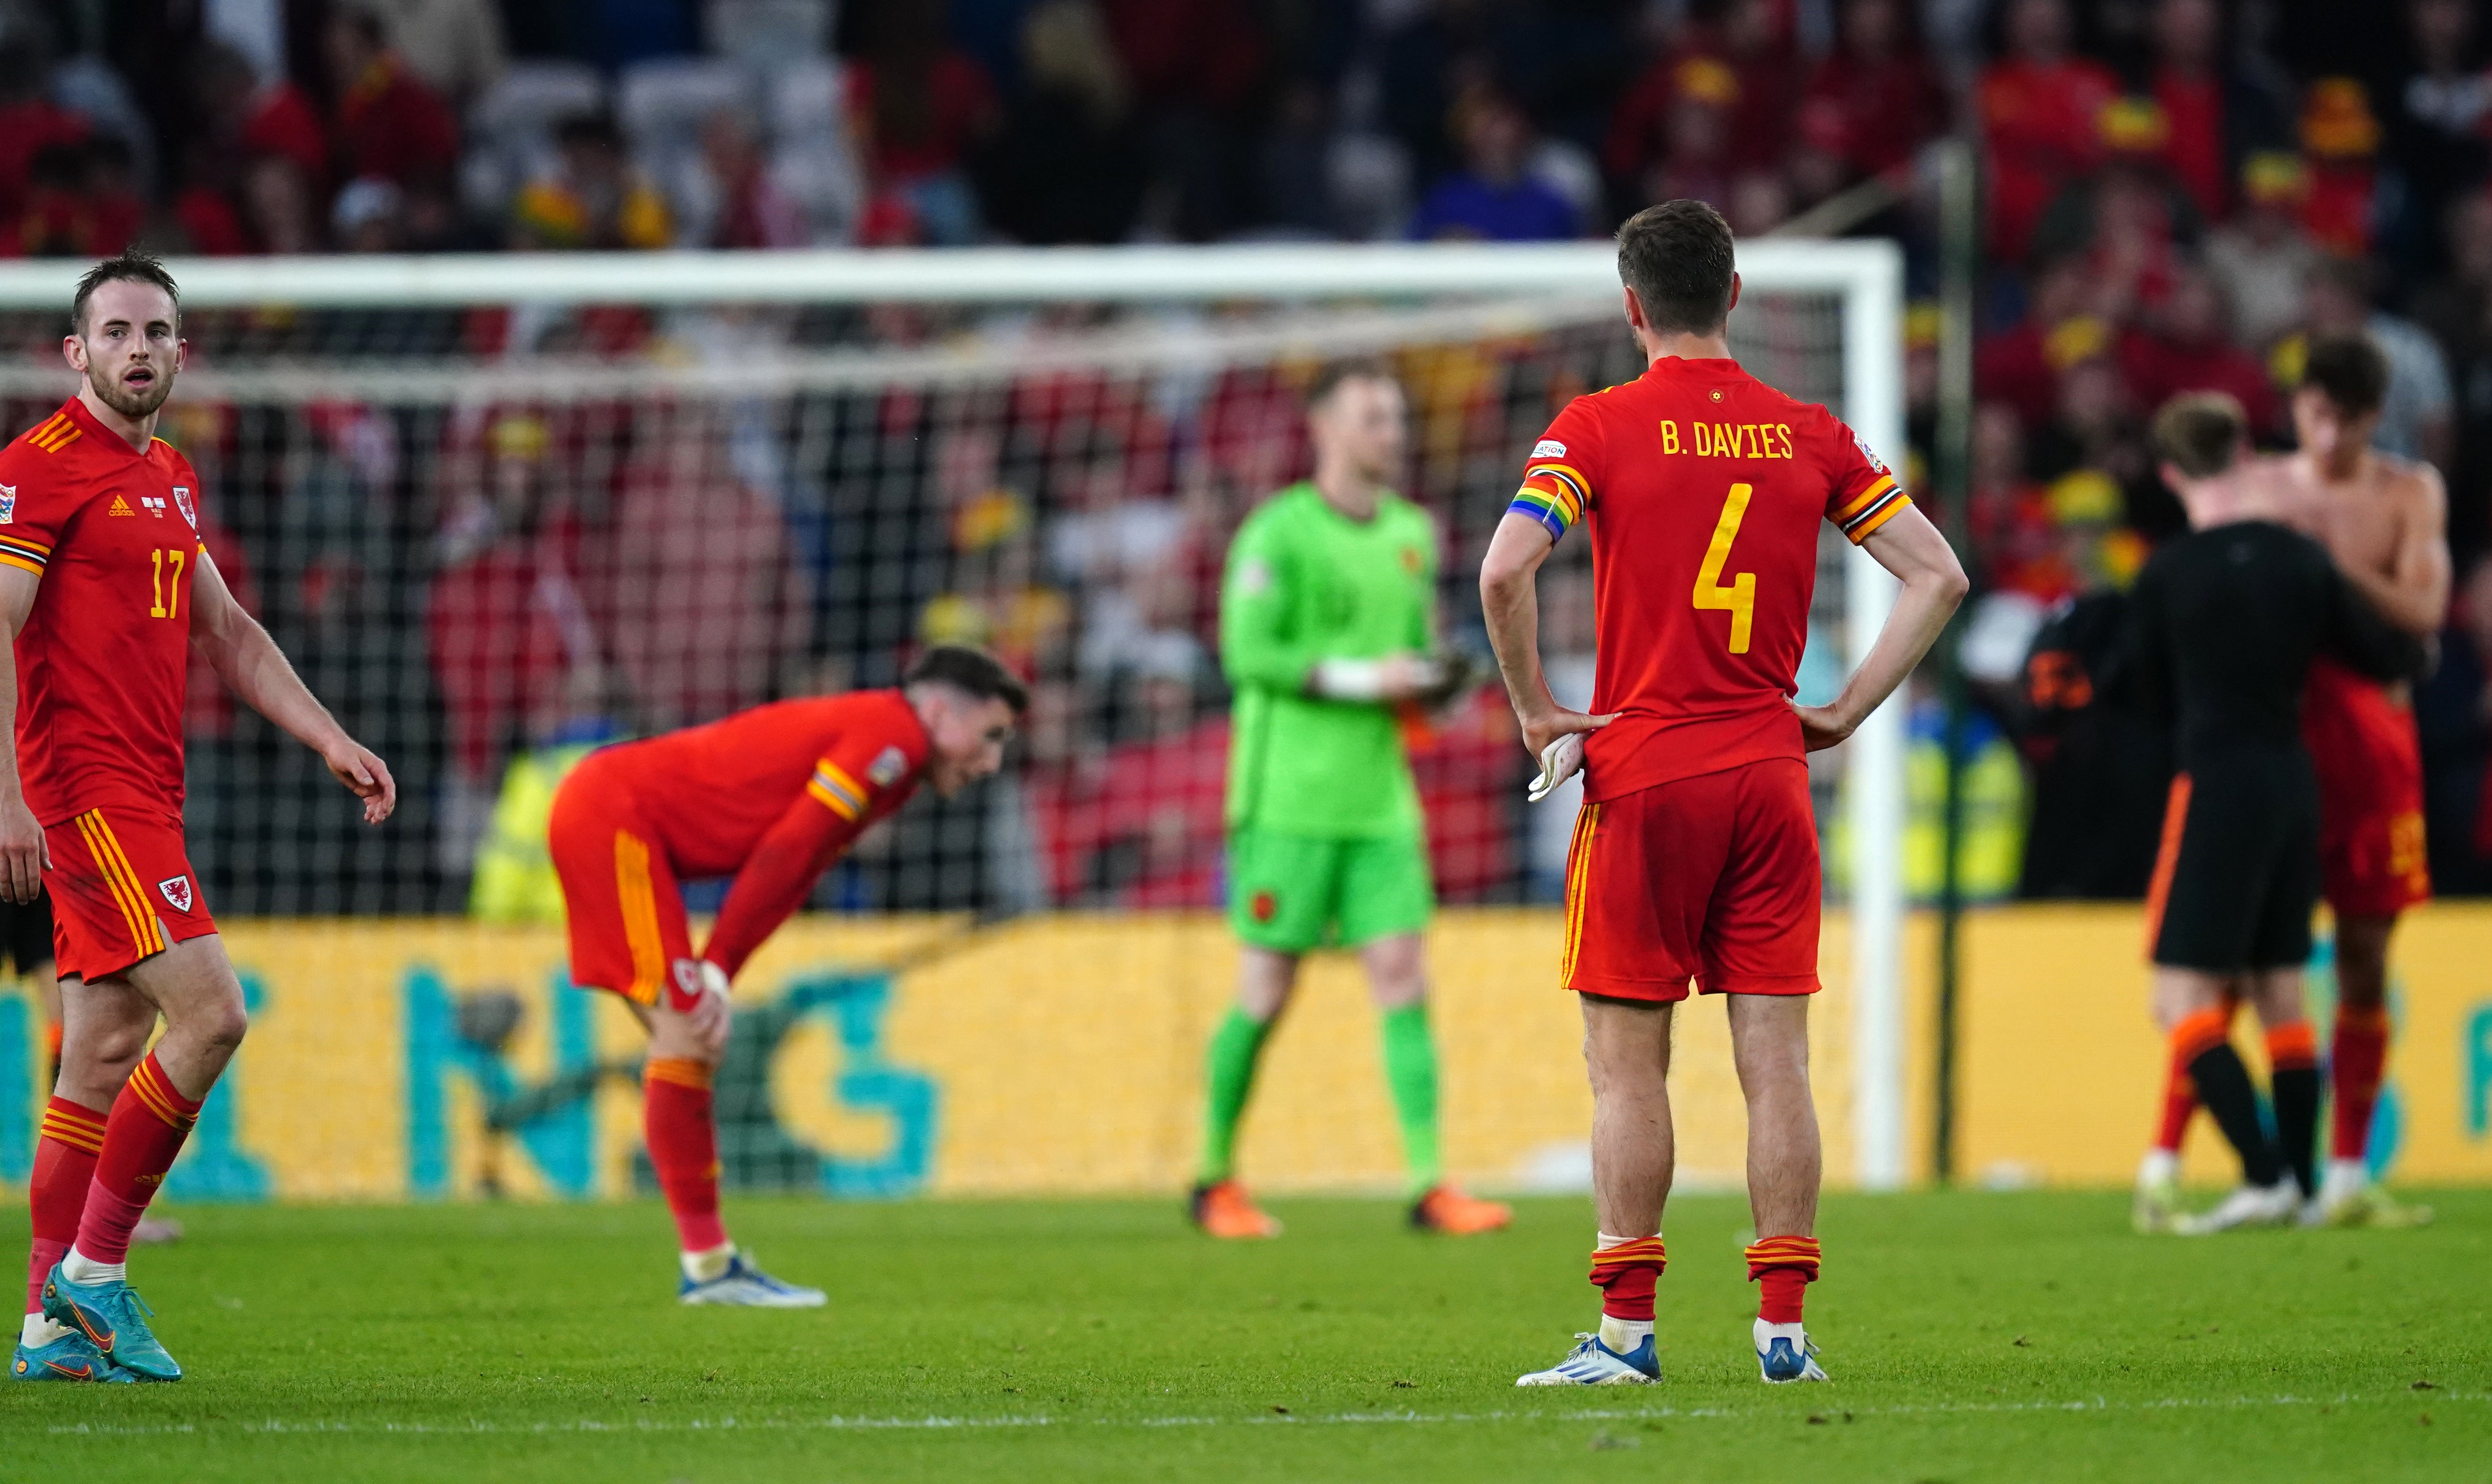 Wales’ Nations League campaign has suffered from conceding late goals (David Davies/PA)